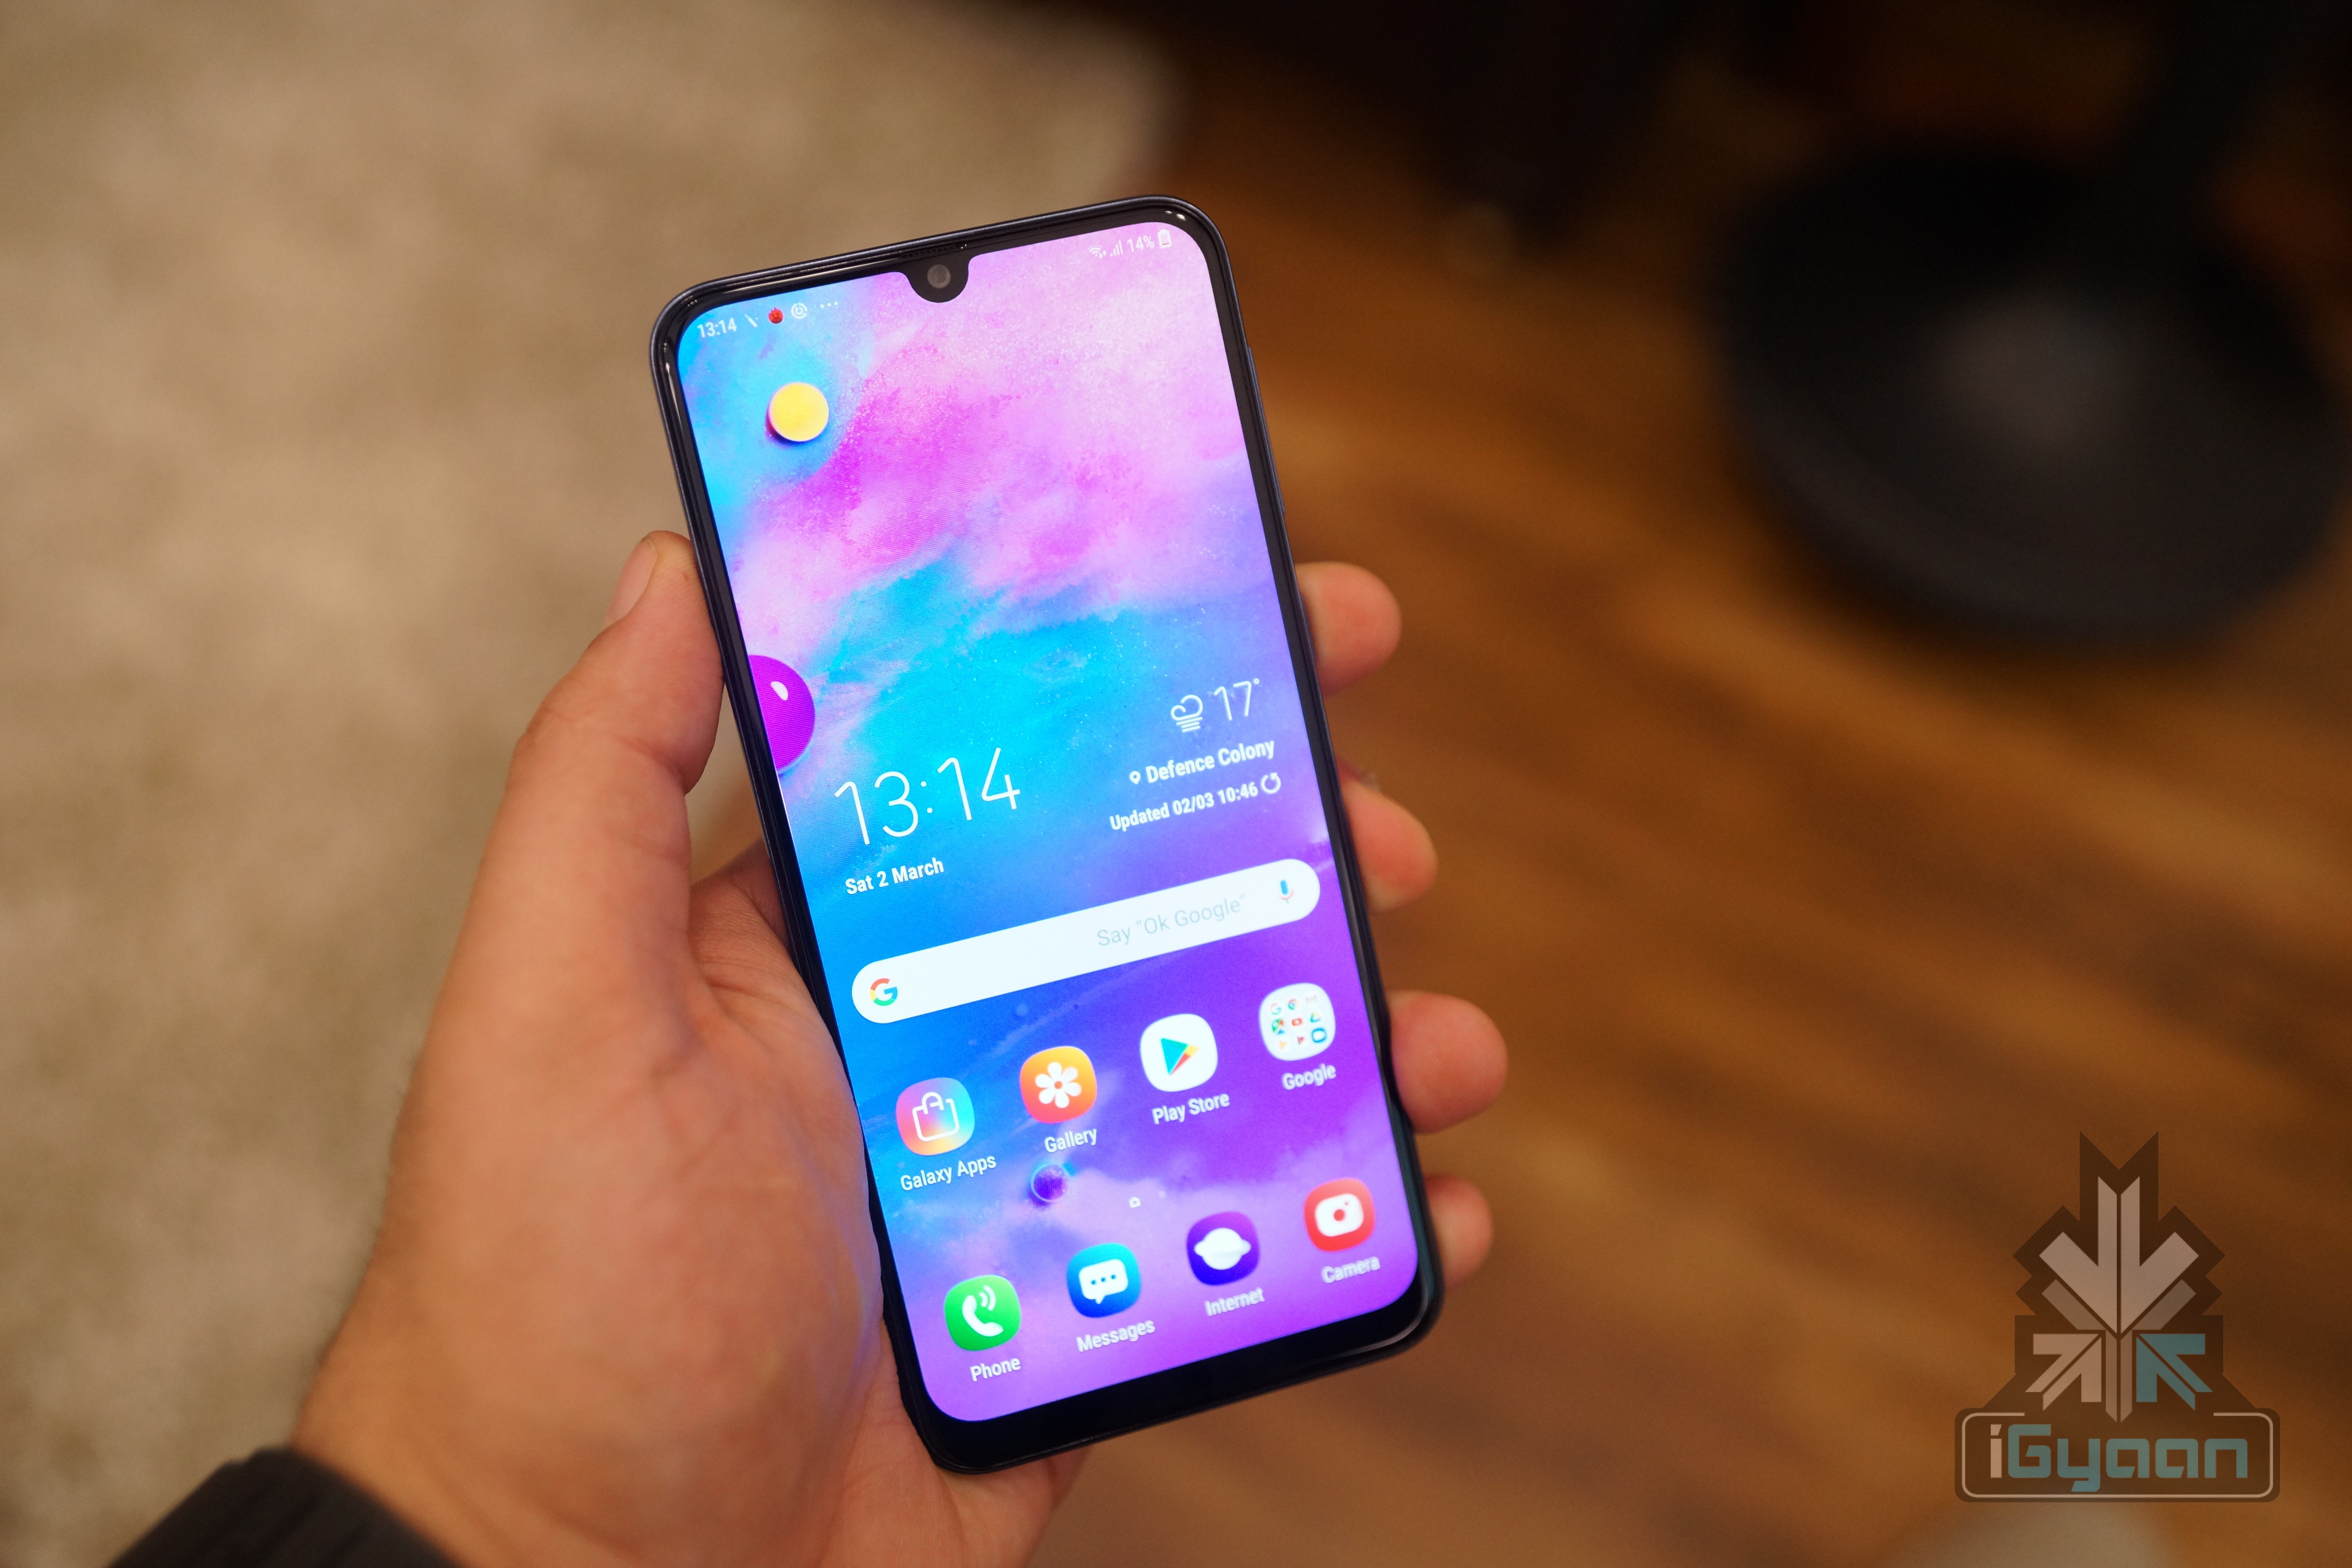 Galaxy M30 (For Reference Purposes)